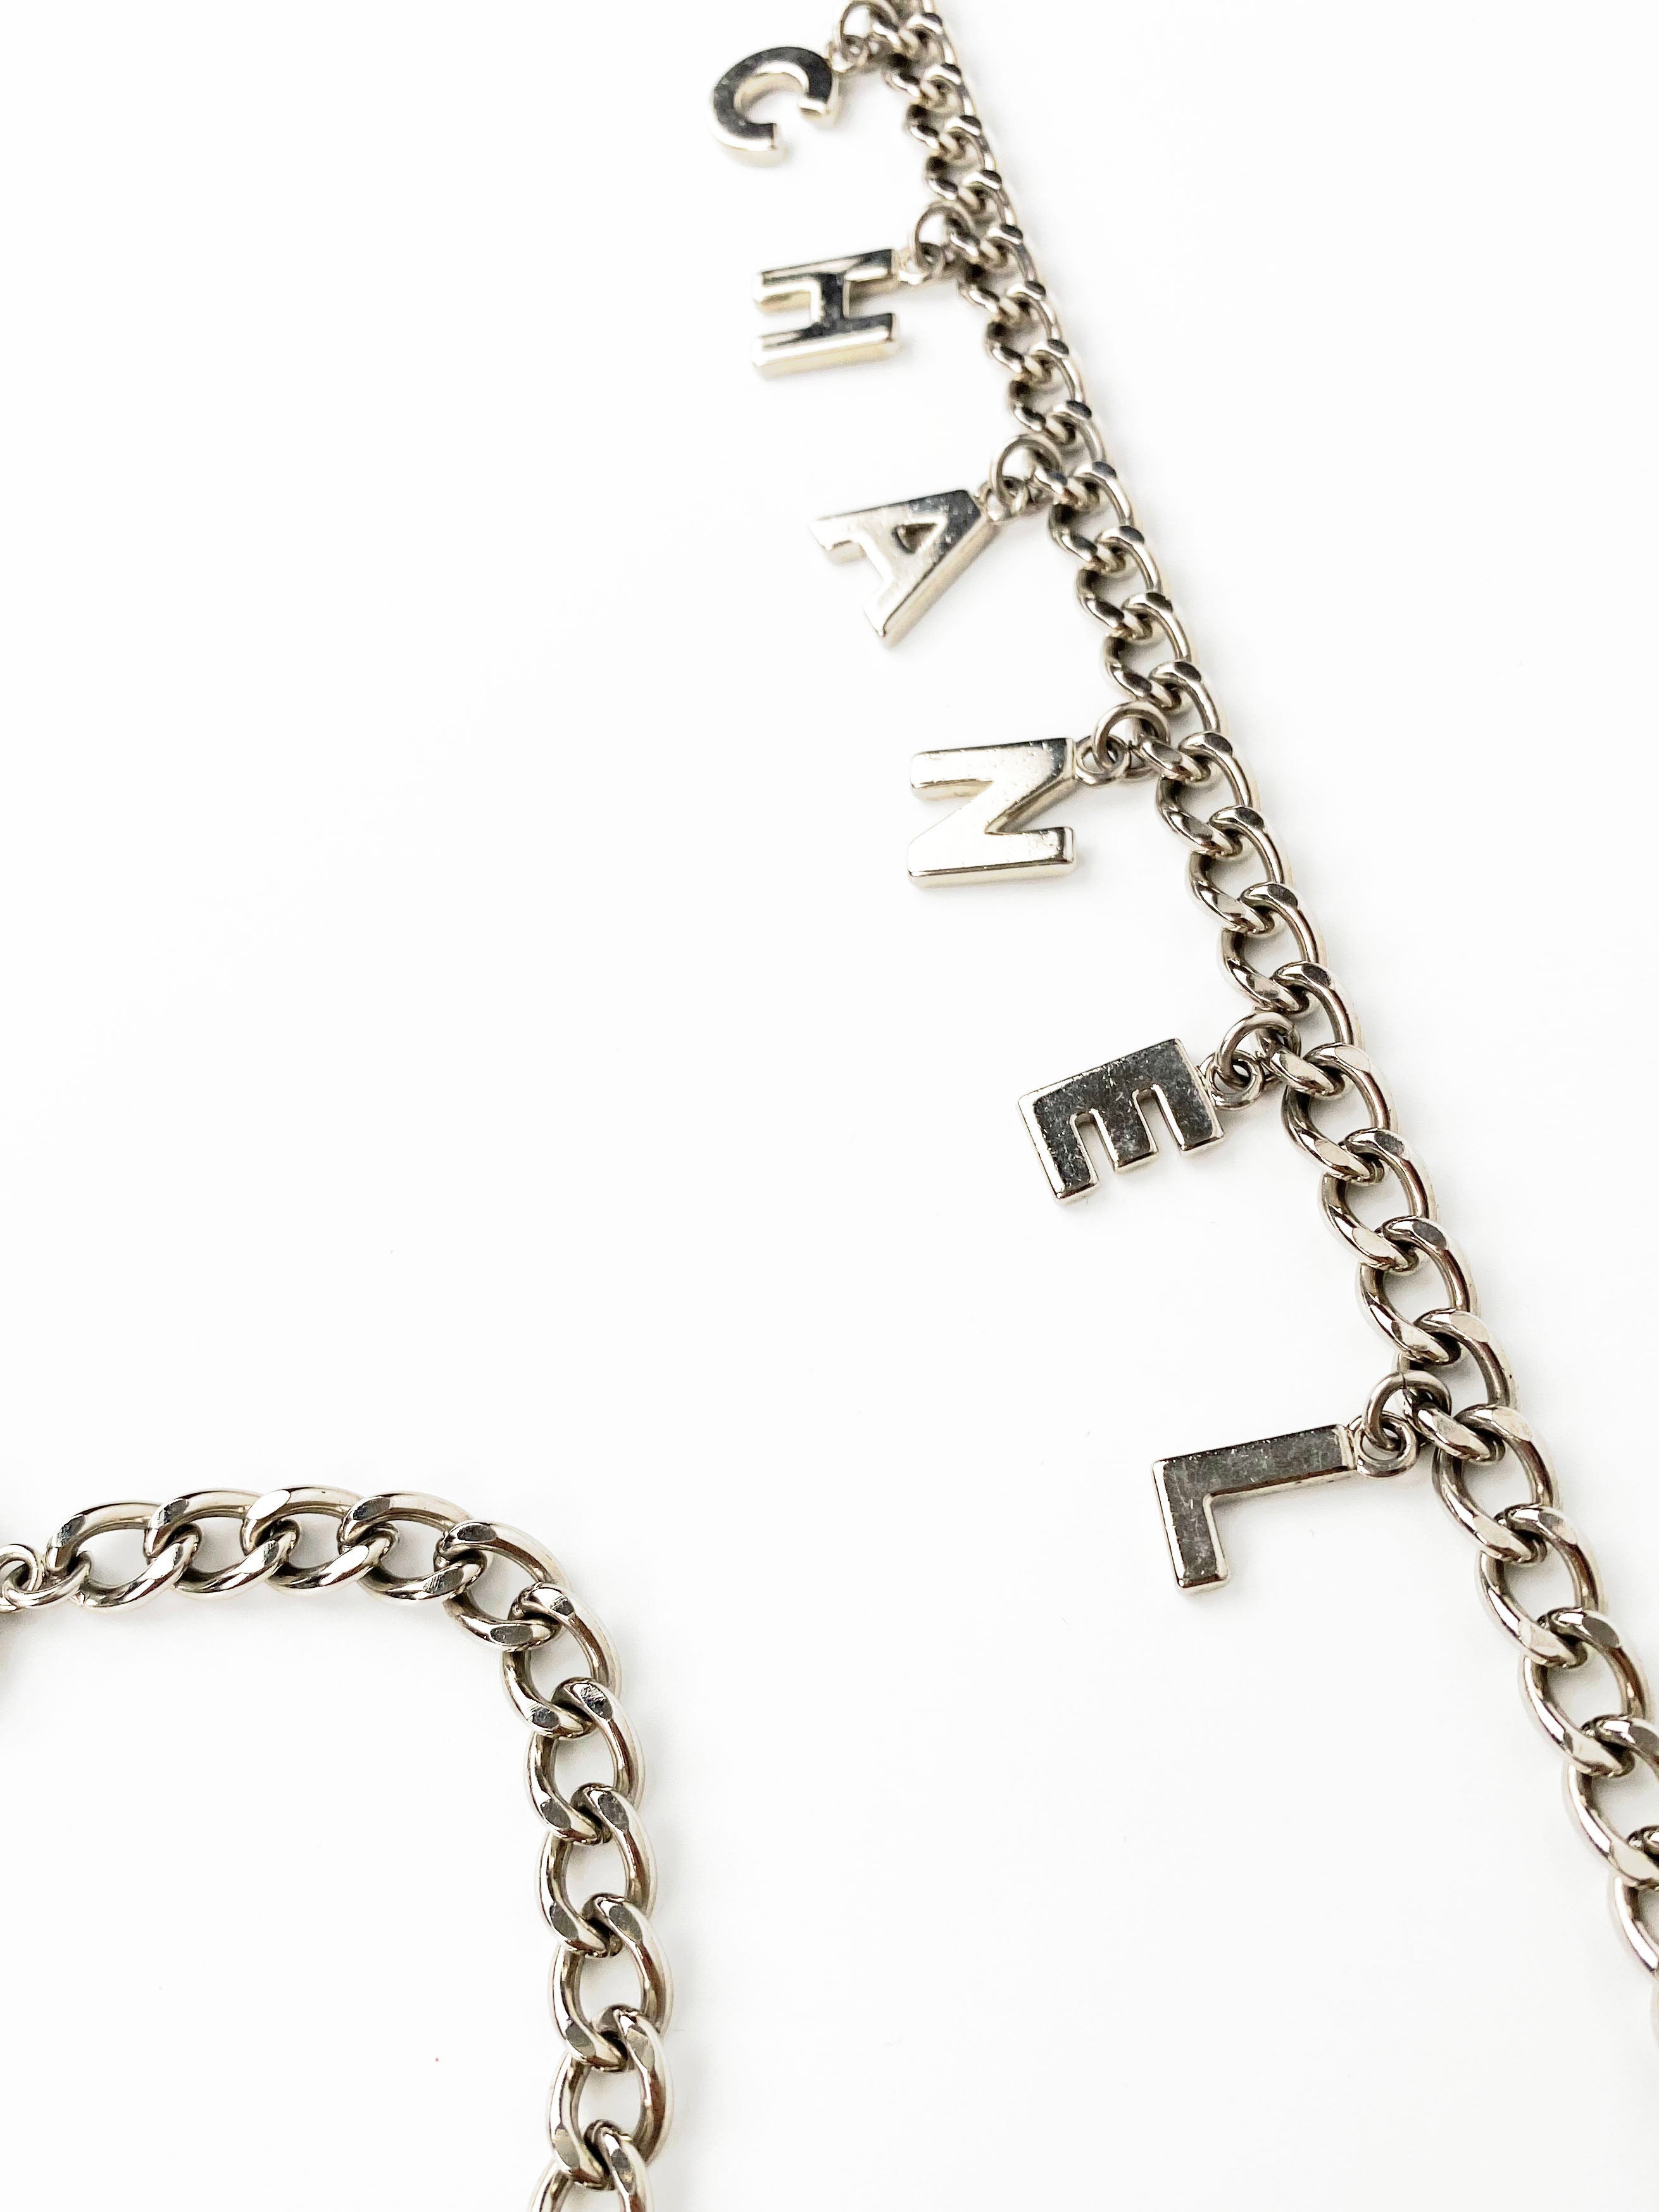 Chanel Silver Chain Belt with Letter Charms